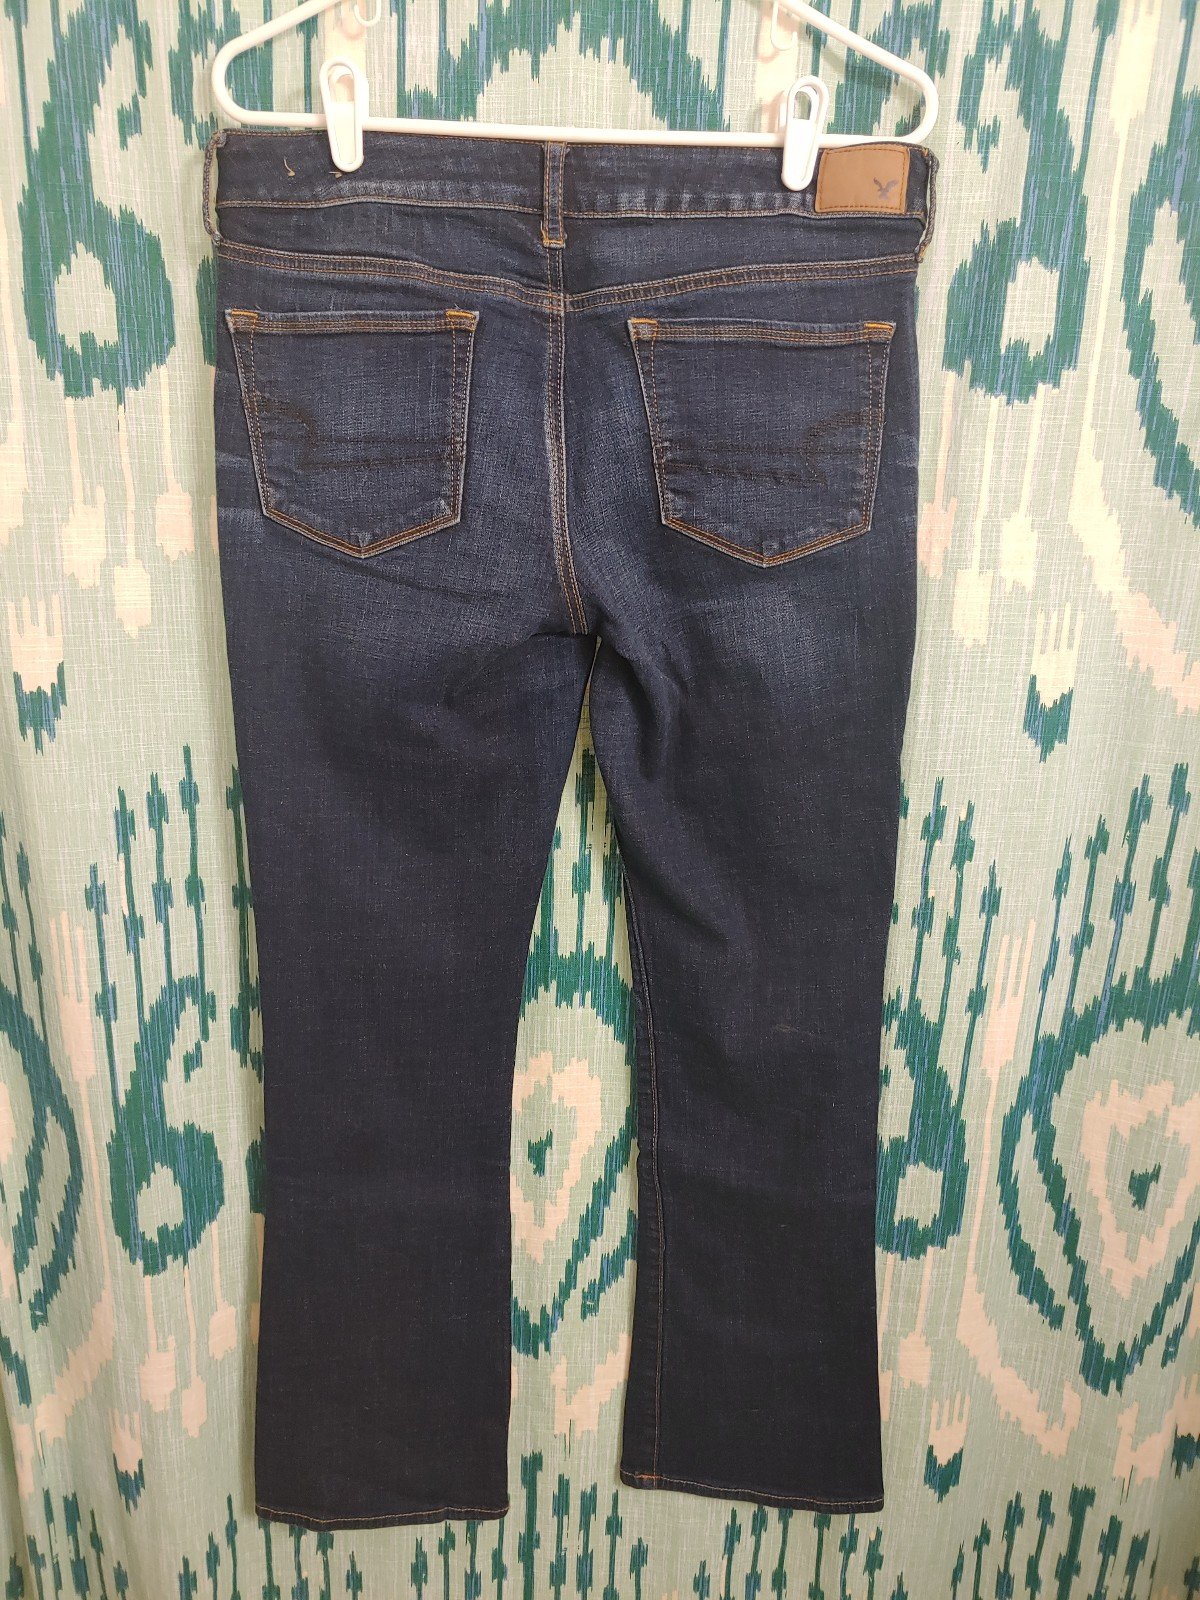 large selection American Eagle Skinny Kick Jeans Size 12 IcyhxgWc6 New Style